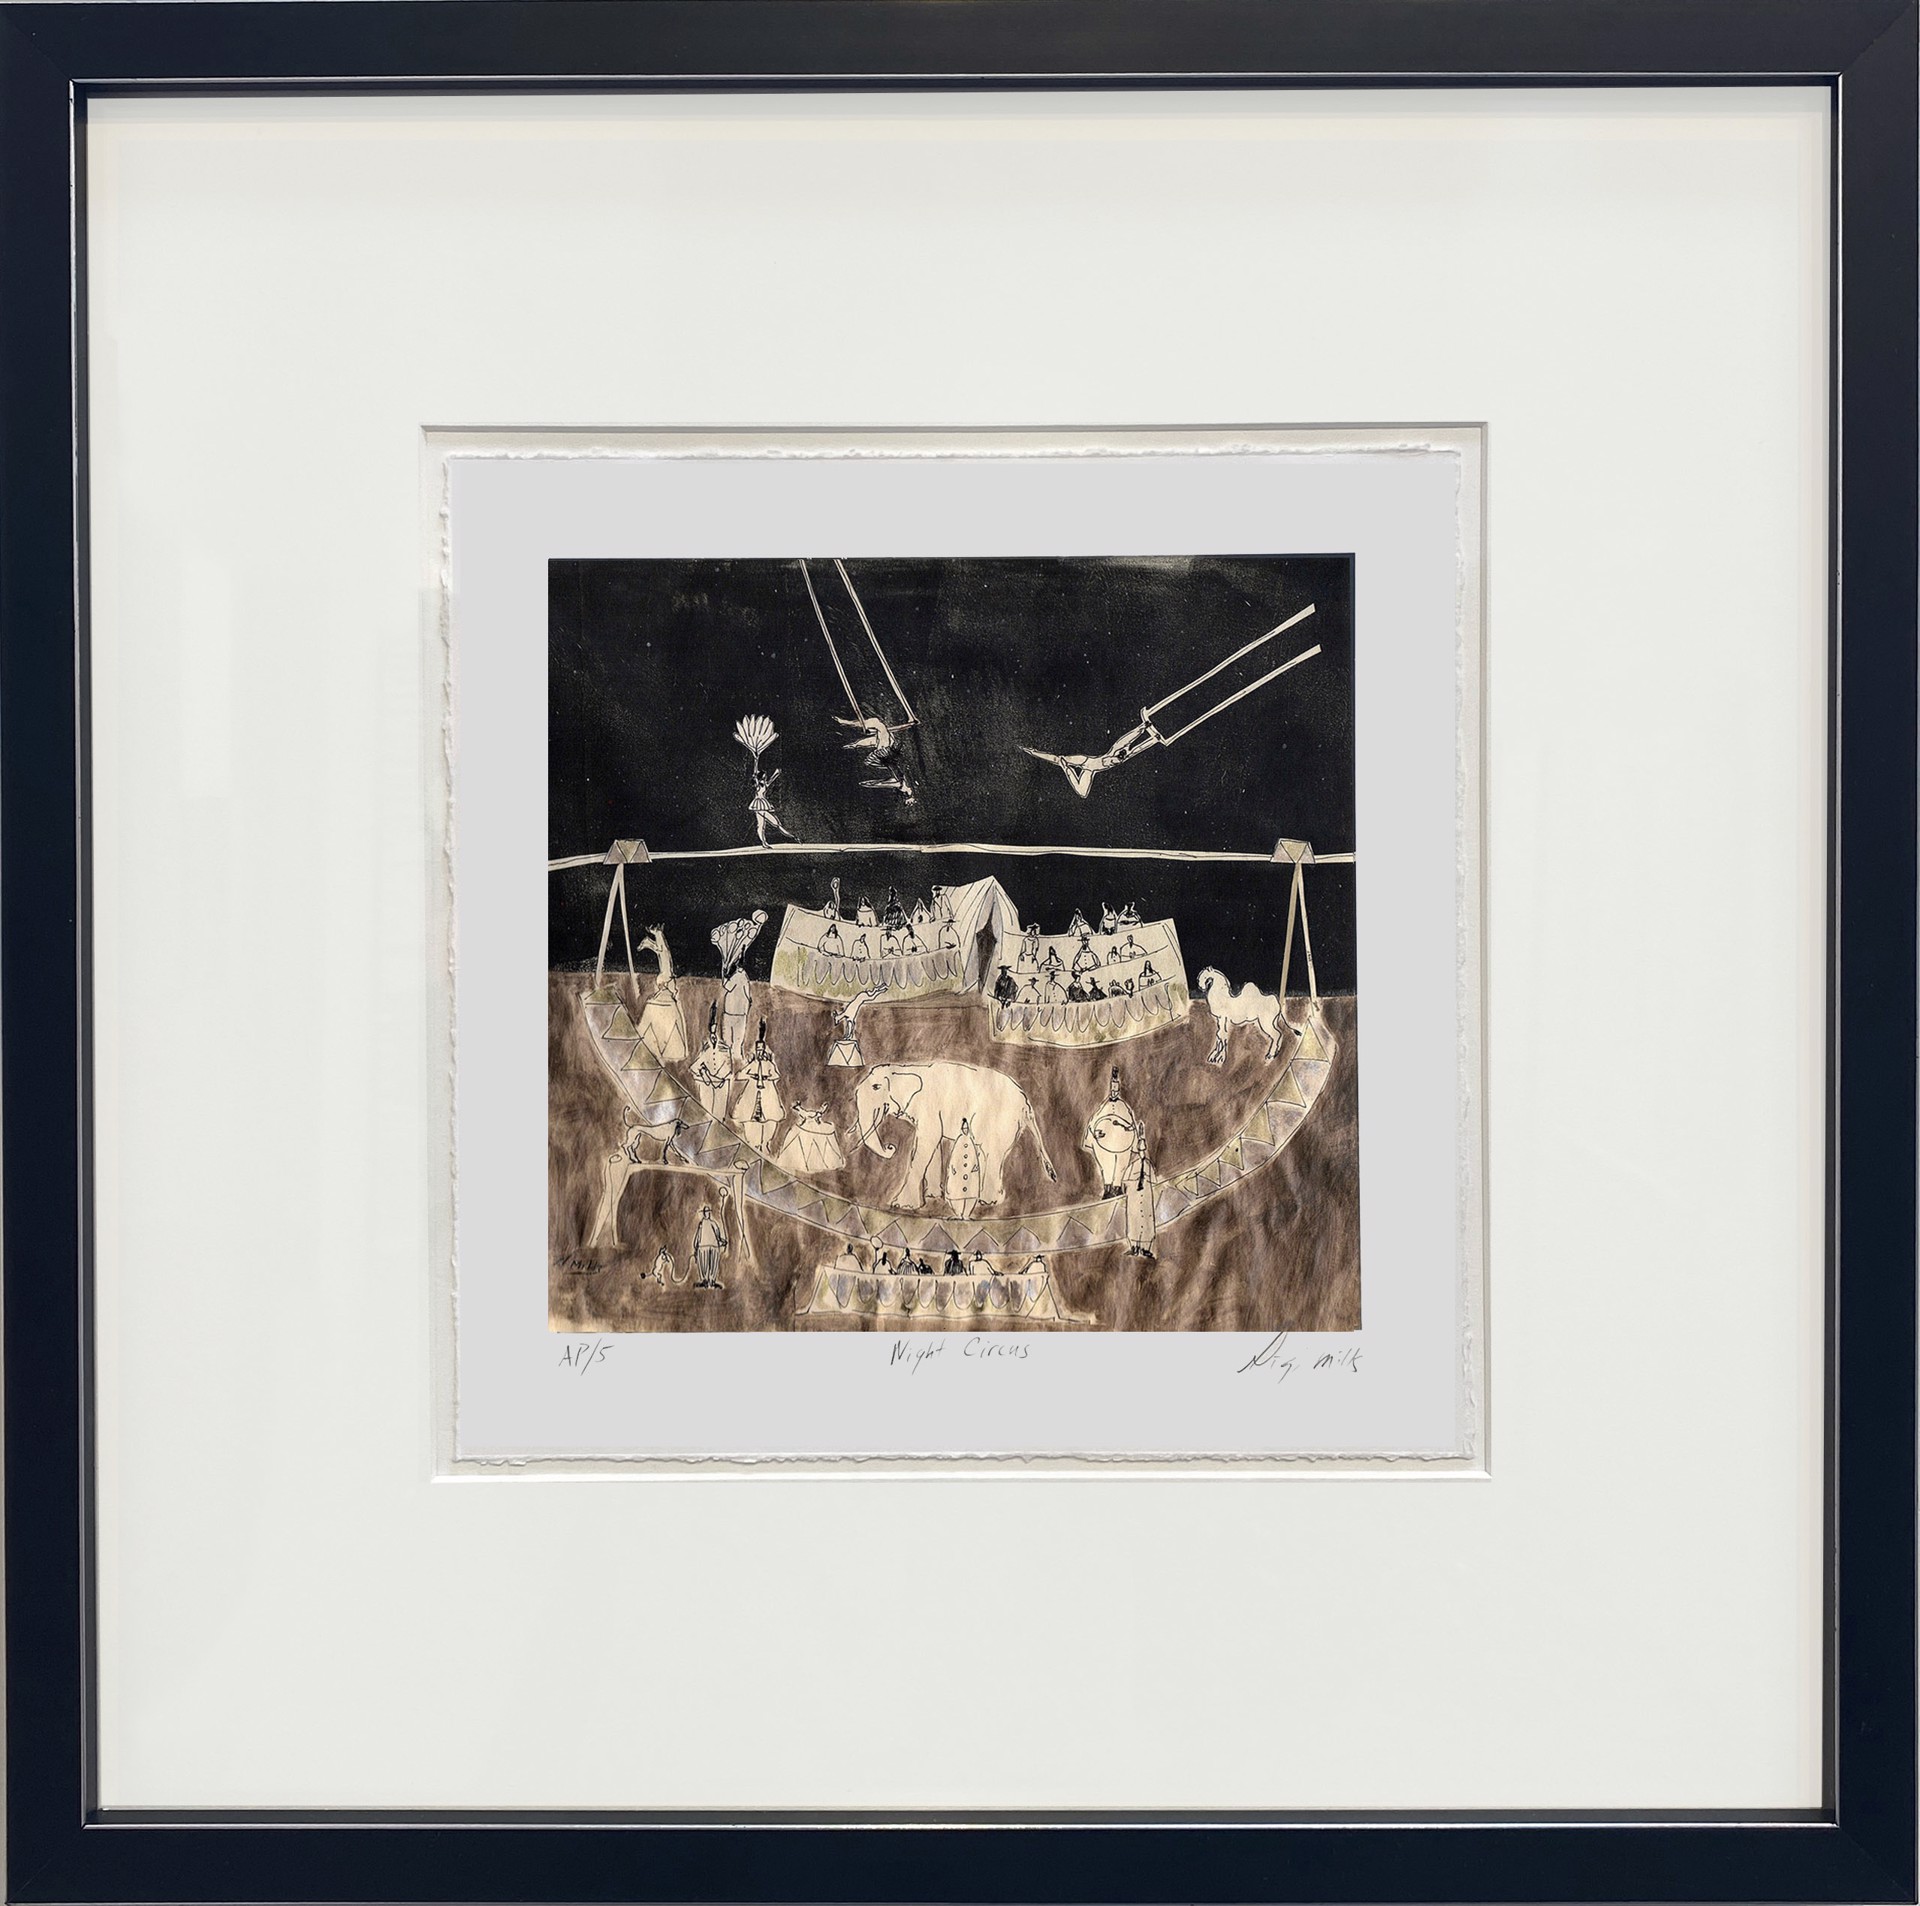 Night Circus (framed) by Gigi Mills - limited edition prints